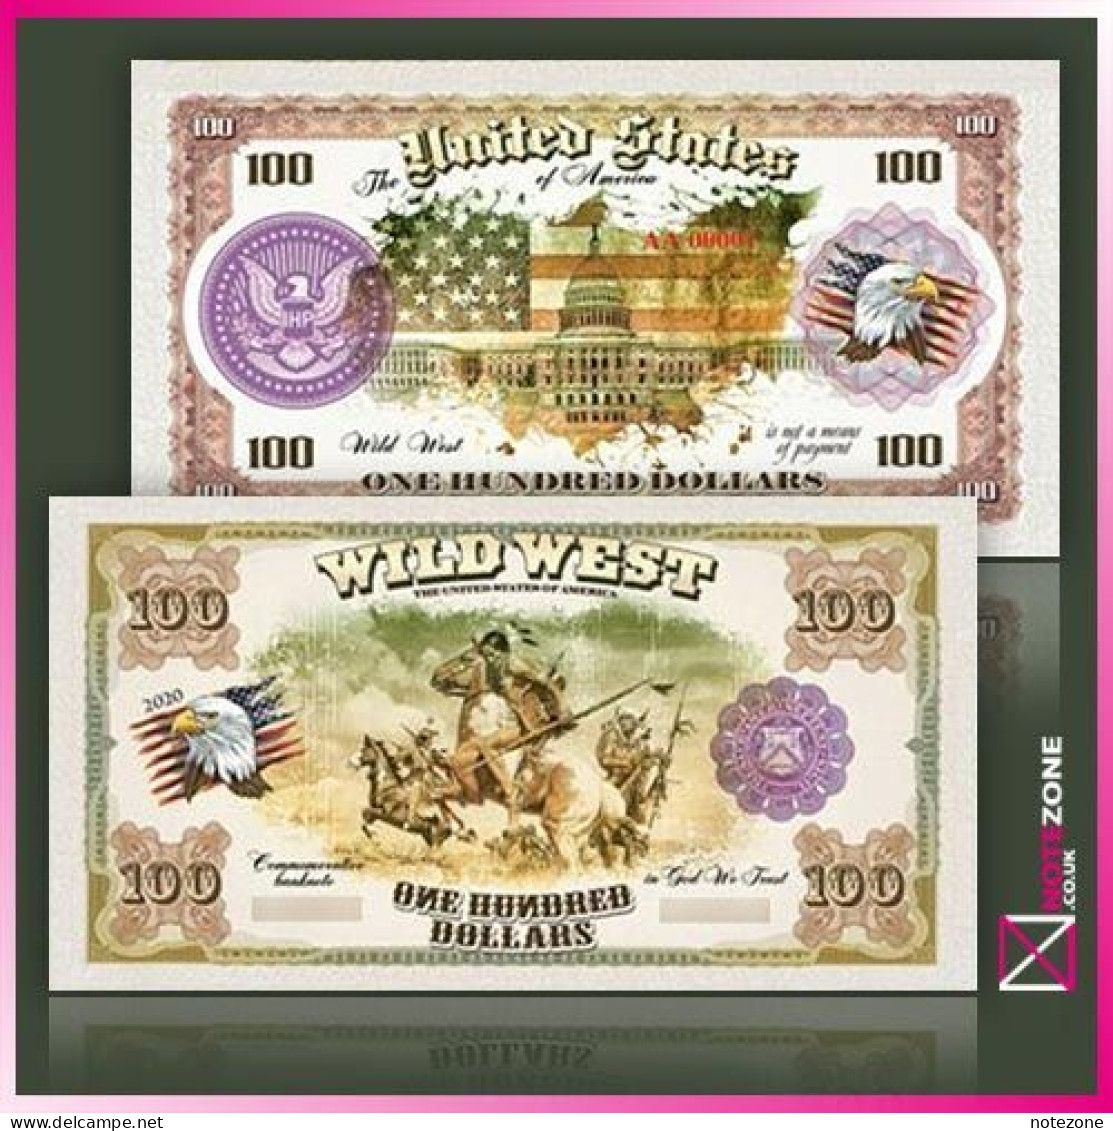 5 Notes Set! WILD WEST USA $100 PLASTIC Notes With Spot UV Private Fantasy Test Note - Collections